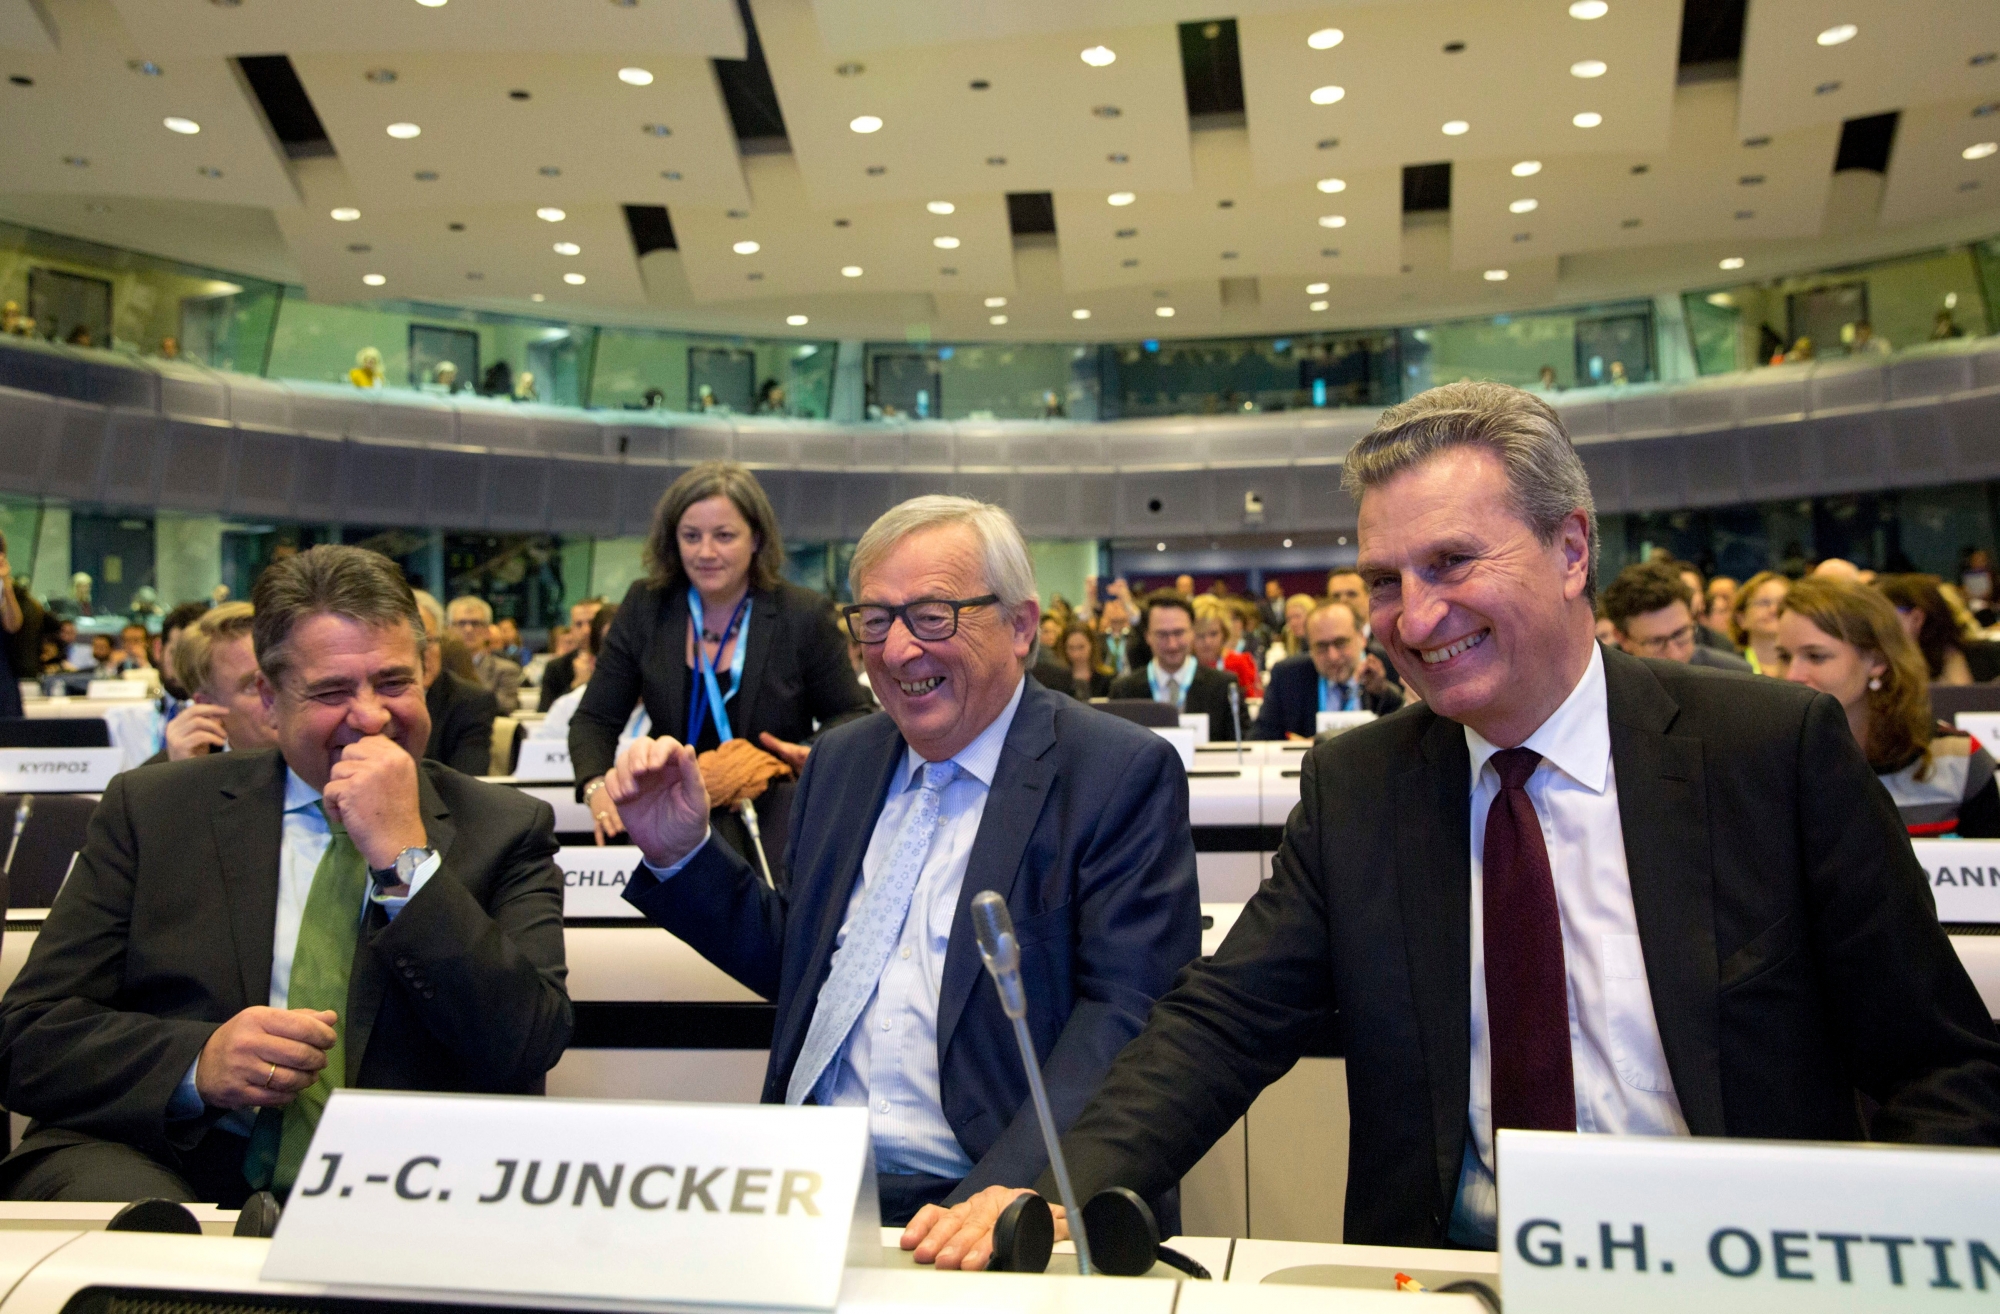 European Commission President Jean-Claude Juncker, center, European Commissioner for Digital Economy Guenther Oettinger, right, and German Foreign Minister Sigmar Gabriel, left, attend a conference 'Shaping Our Future' at the EU Charlemagne building in Brussels on Monday, Jan. 8, 2018. European Commission President Jean-Claude Juncker opened a debate Monday on the EU's next long-term budget, laying out the bloc's spending priorities over the seven years from 2021-2026. (AP Photo/Virginia Mayo) Belgium EU Budget